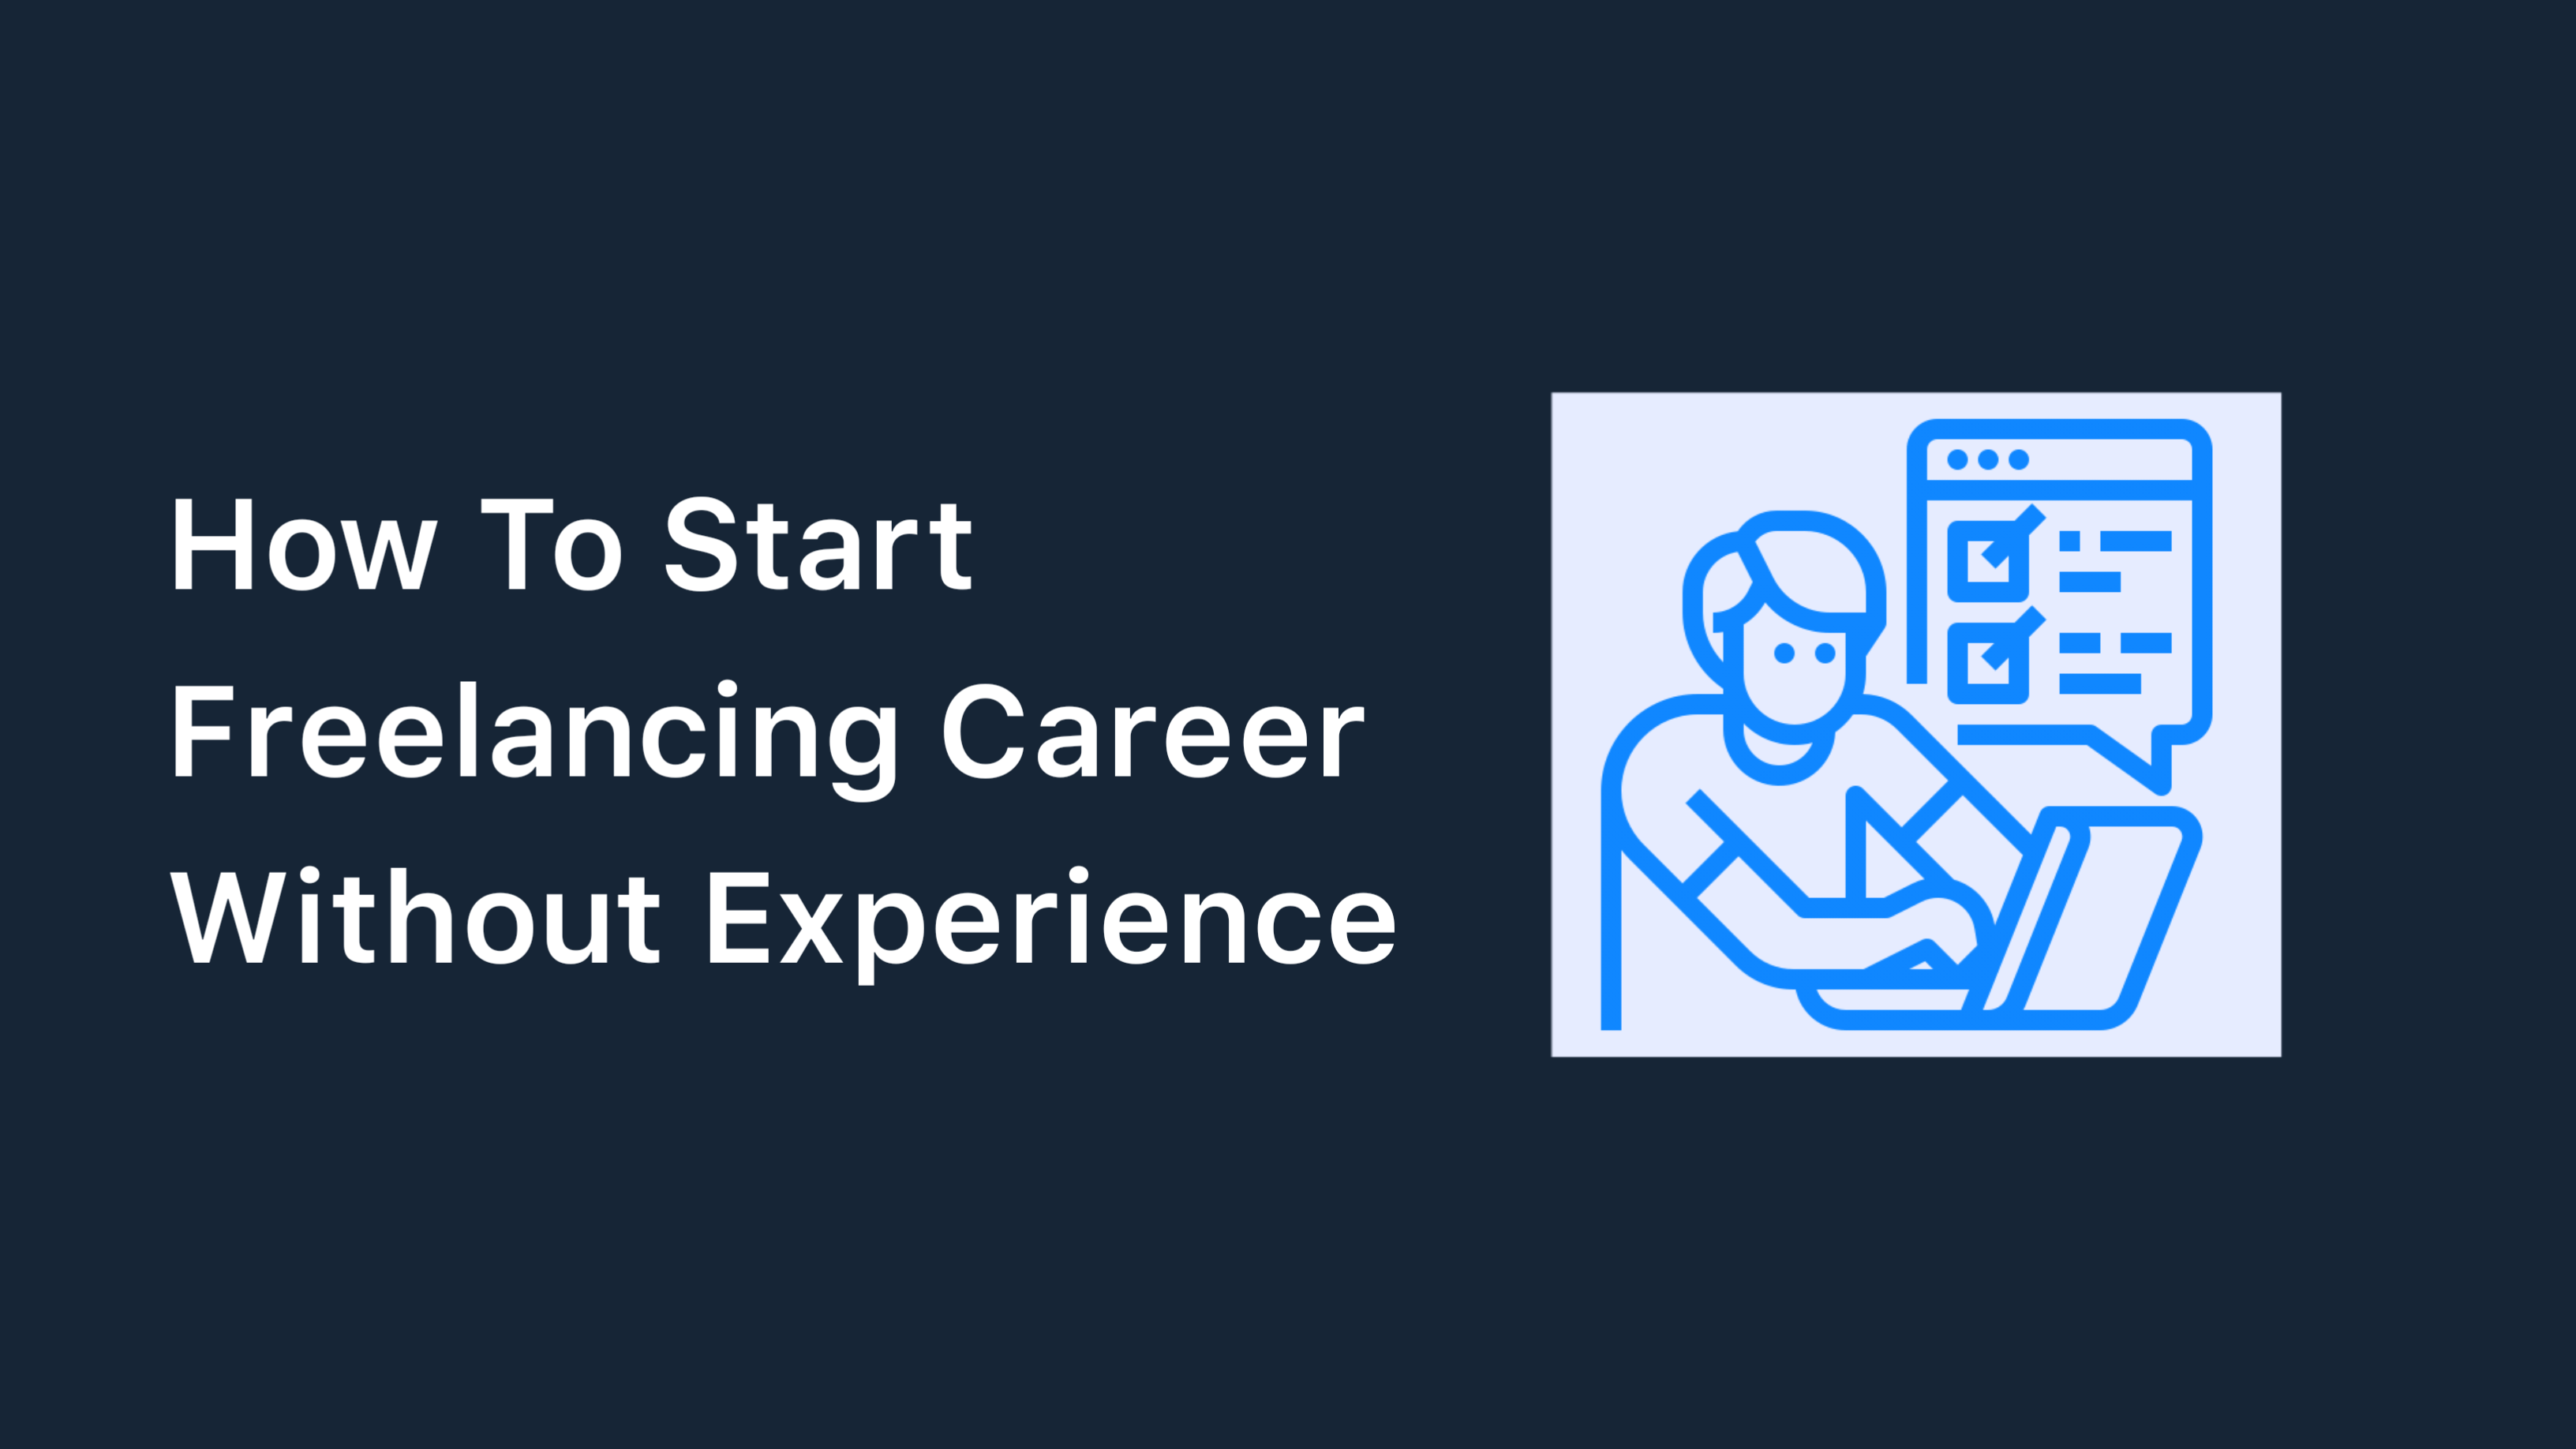 How To Start Freelancing Without Experience